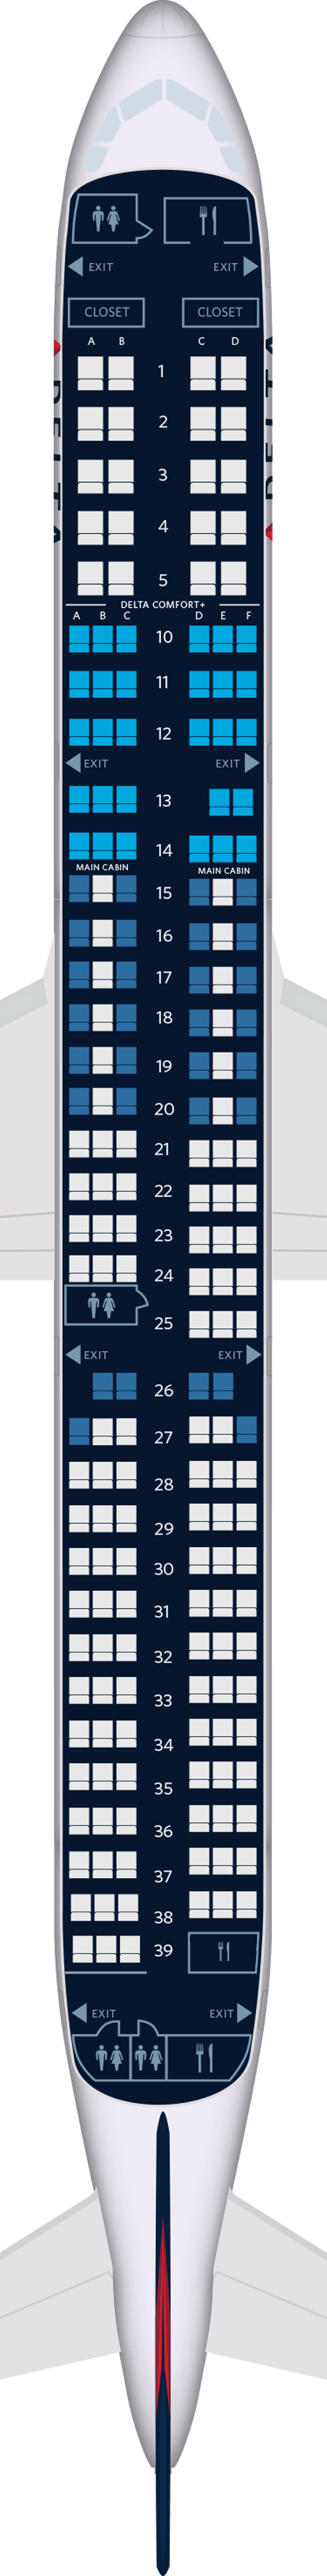 Airbus A Seat Maps Specs Amenities Delta Air Lines